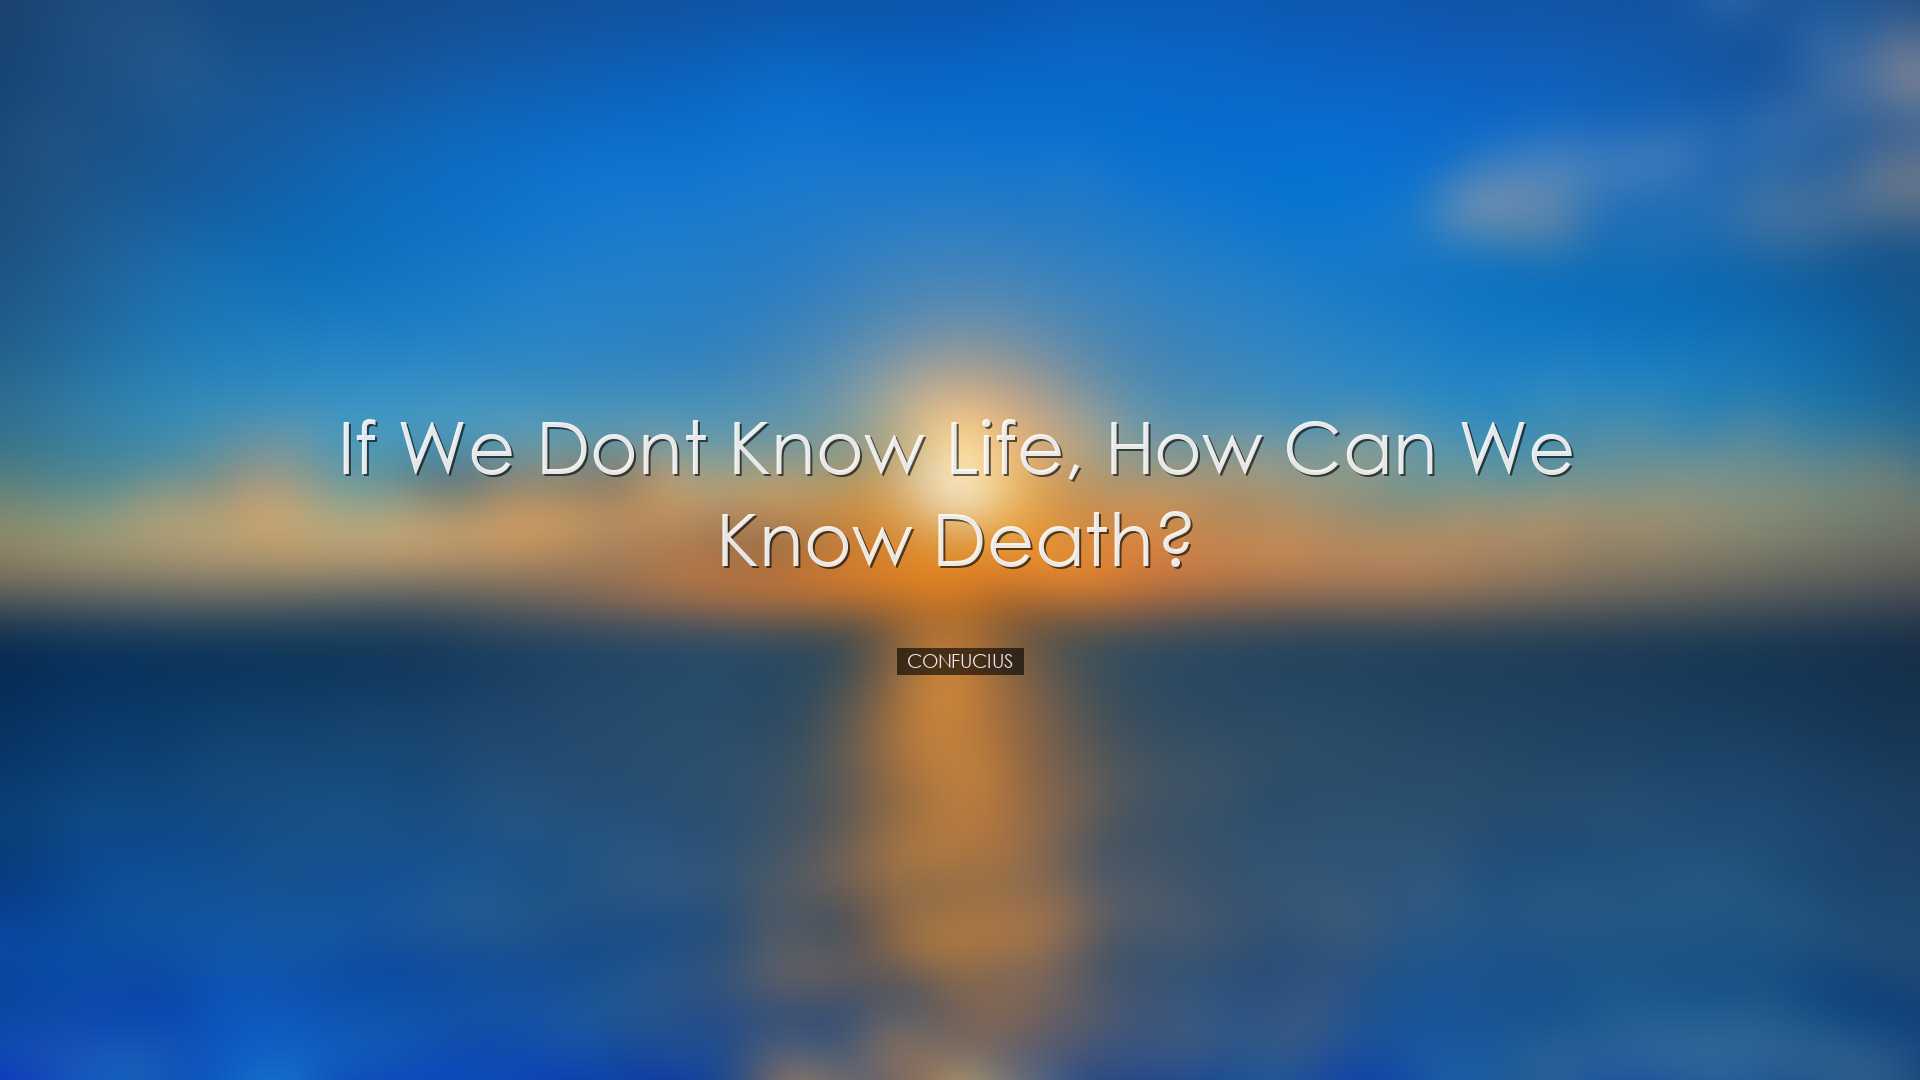 If we dont know life, how can we know death? - Confucius